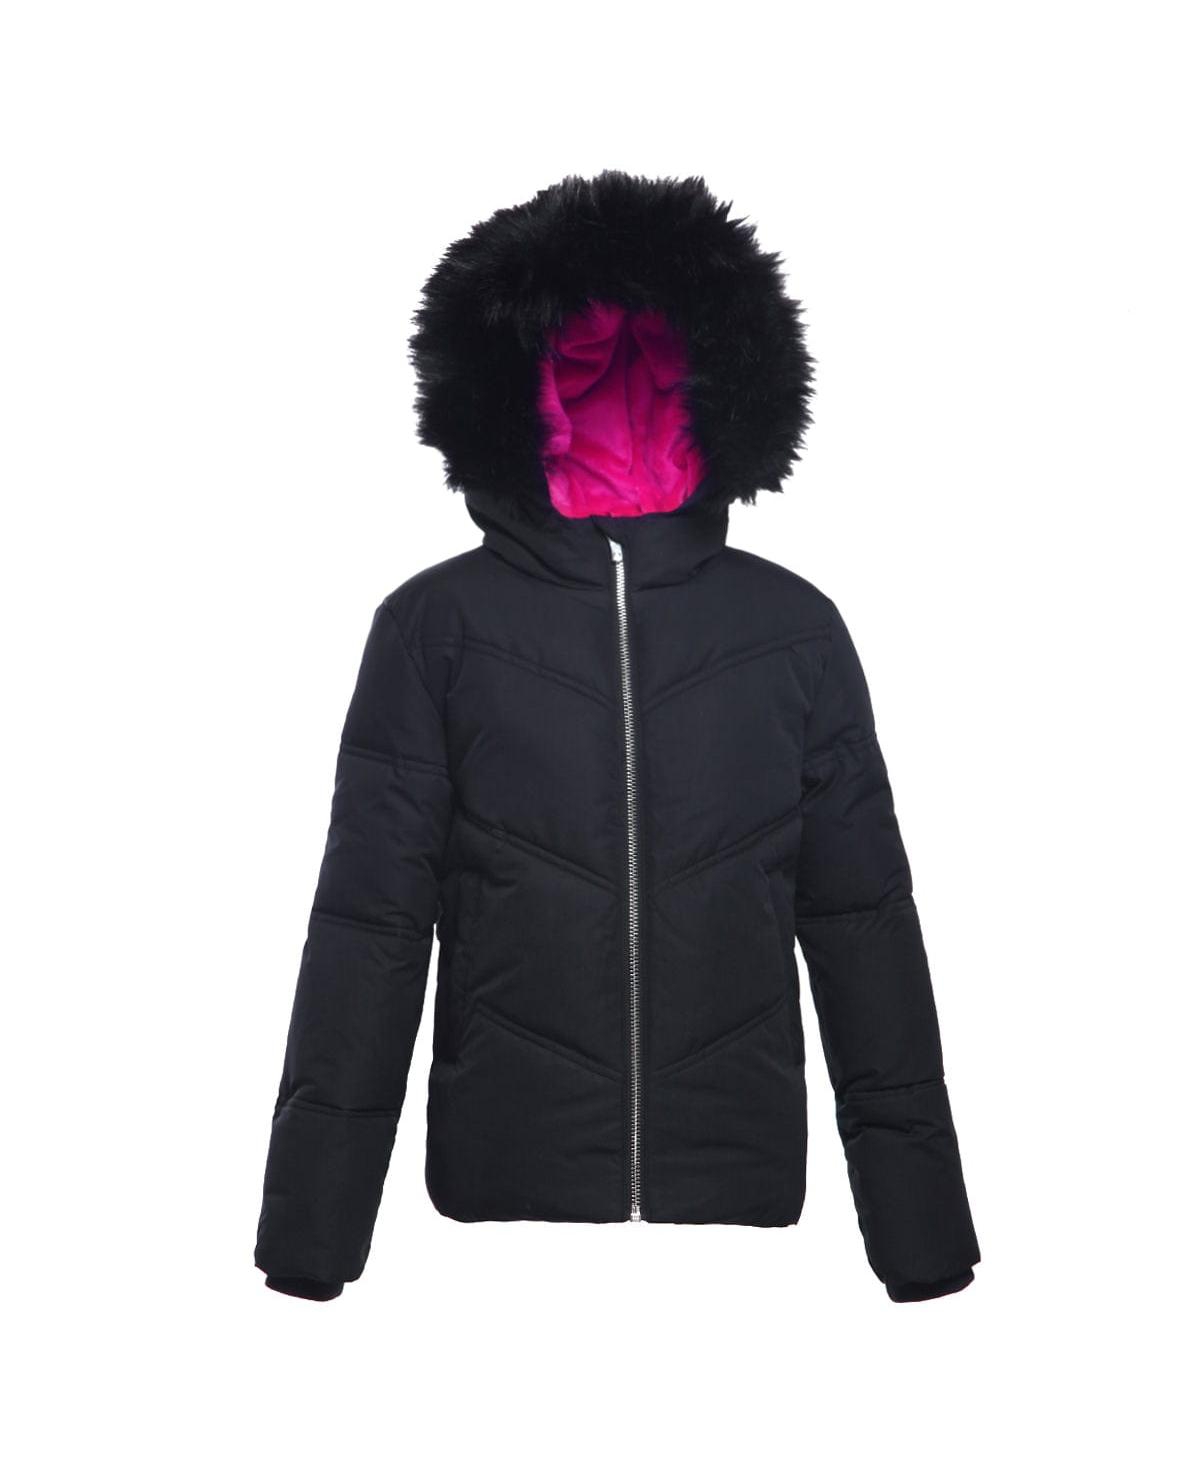 Little and Big Girls' Heavyweight Puffer Jacket Bubble Coat - Gradient Ombre